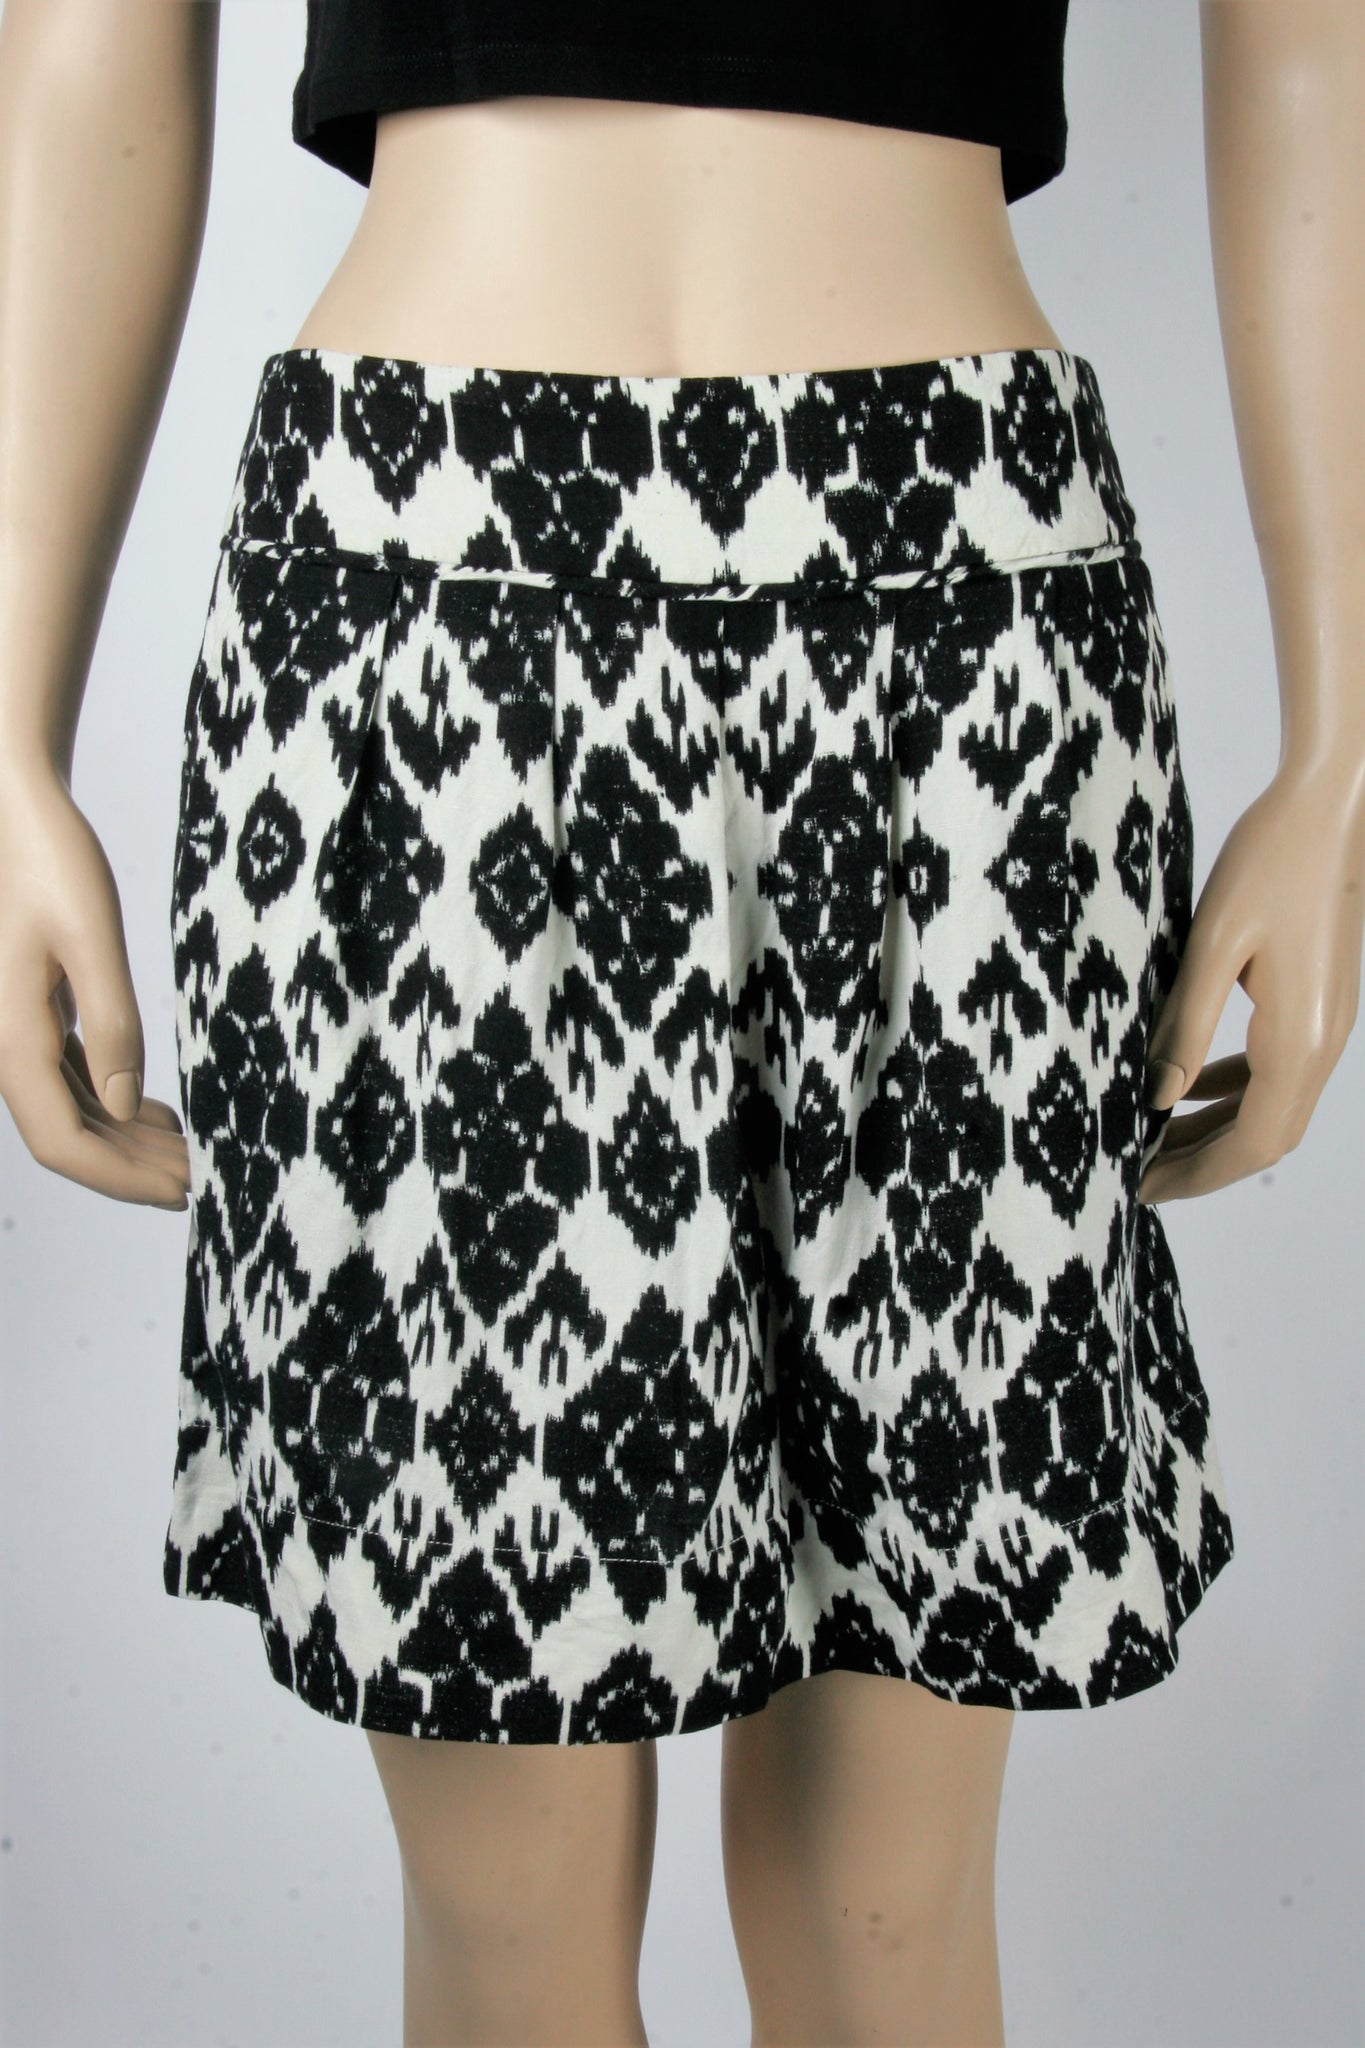 I purchased this Petite size 0 skirt from Ann Taylor. According to